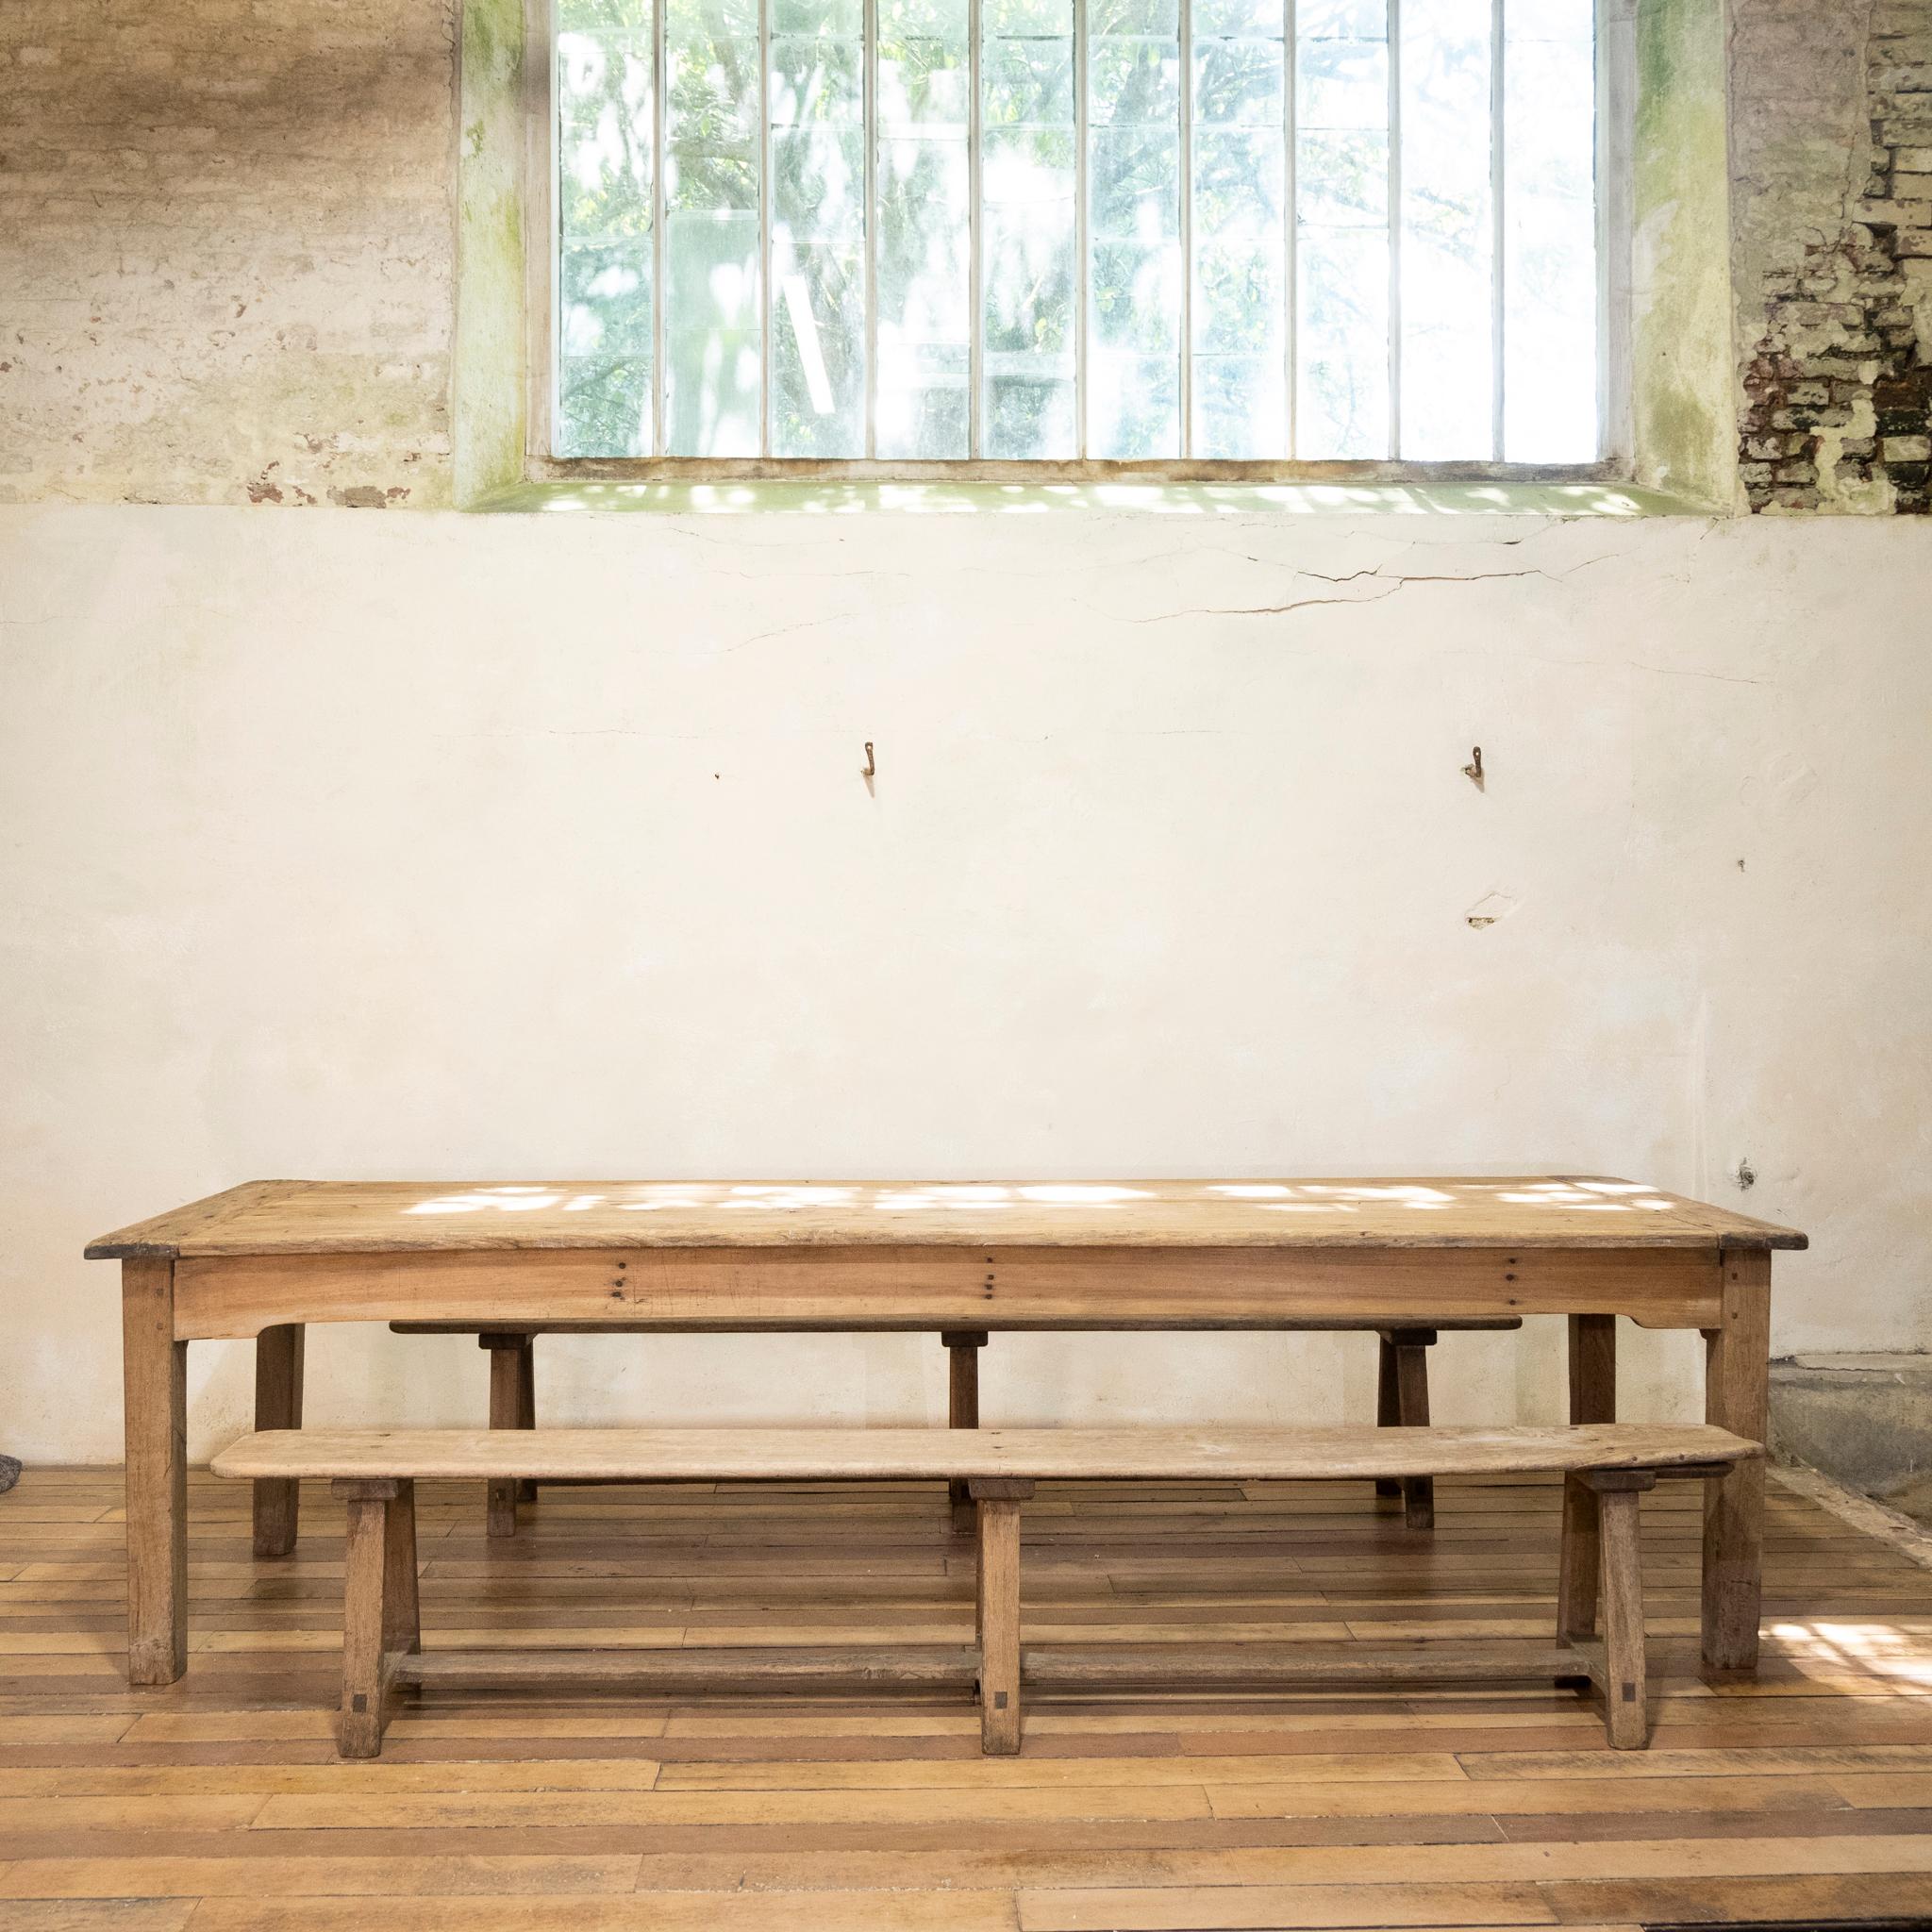 An exceptional large scale 19th-century French sycamore and oak two plank farmhouse table. Raised on slightly tapered legs, demonstrating a large deep drawer located to one end of the table with a simplistic hand-forged handle. Displaying a striking